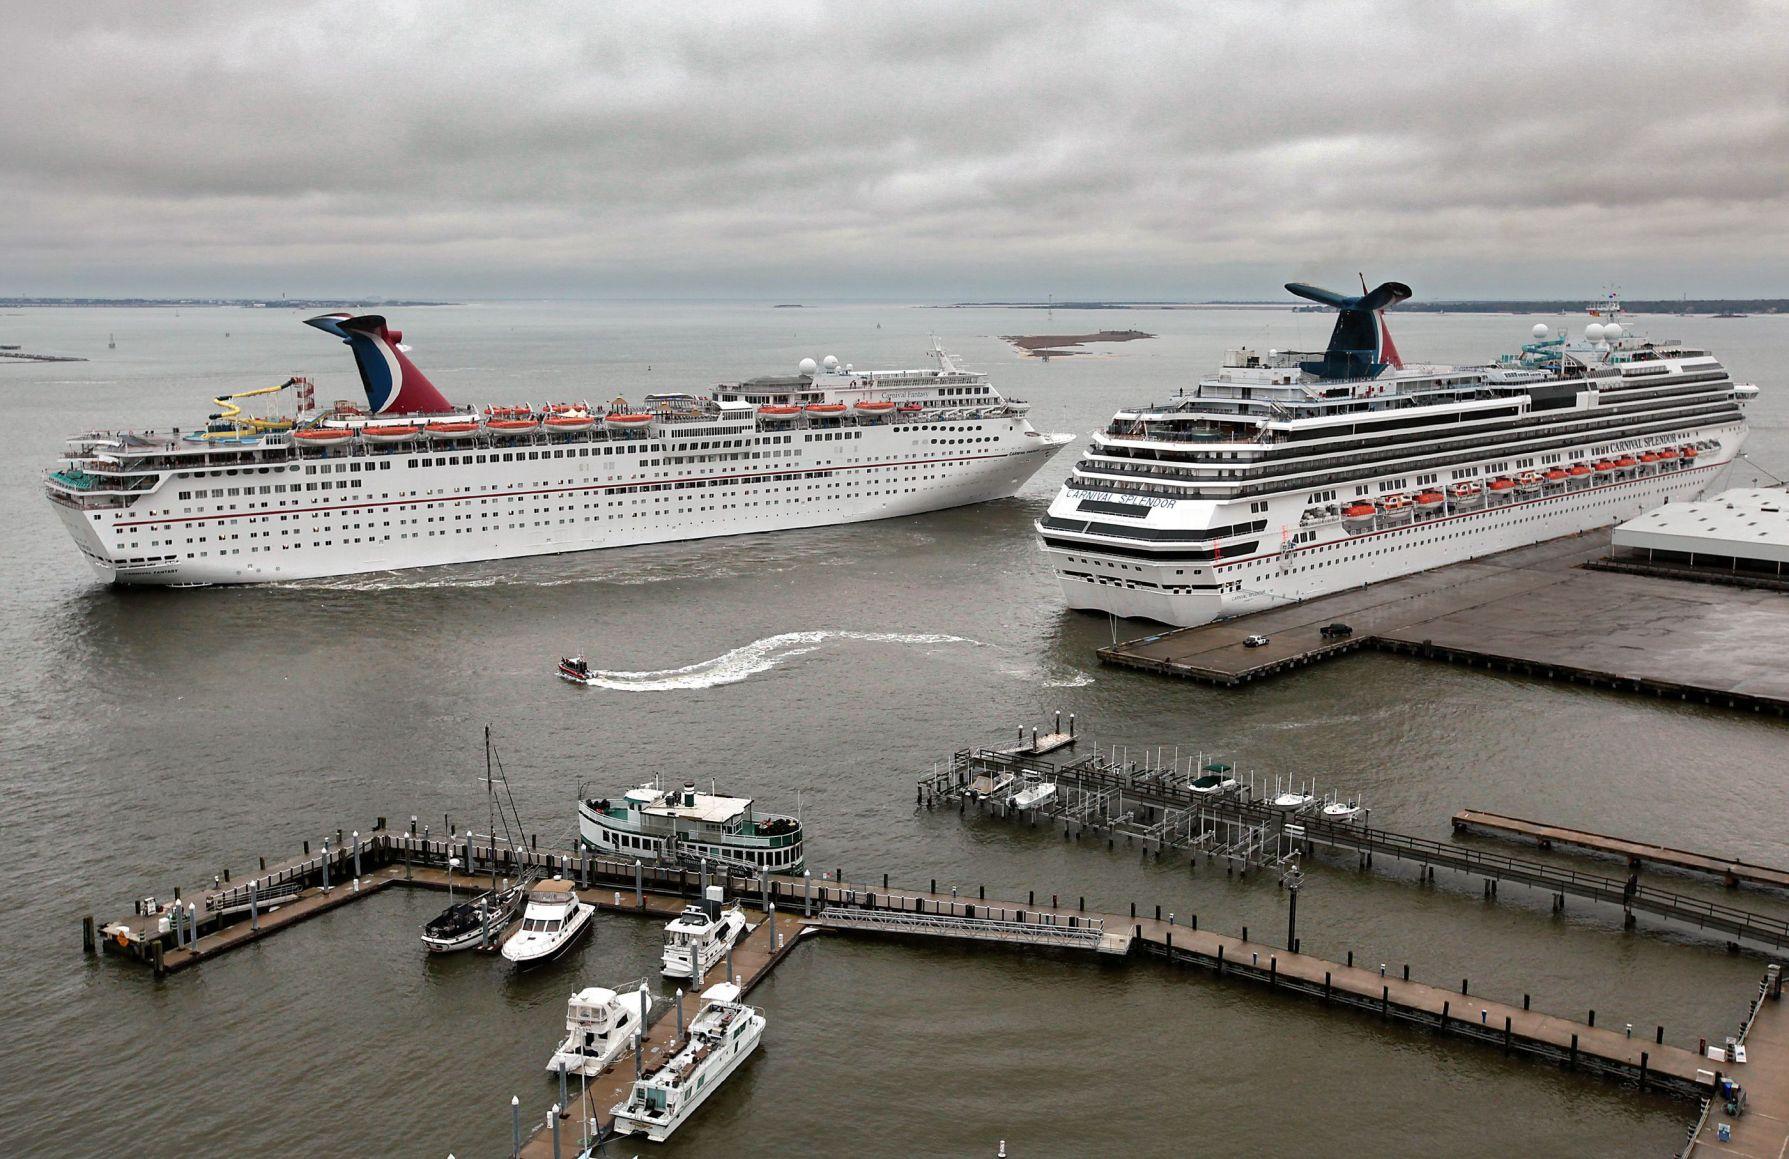 Carnival Crusie ship making emergency stop at Port of Charleston